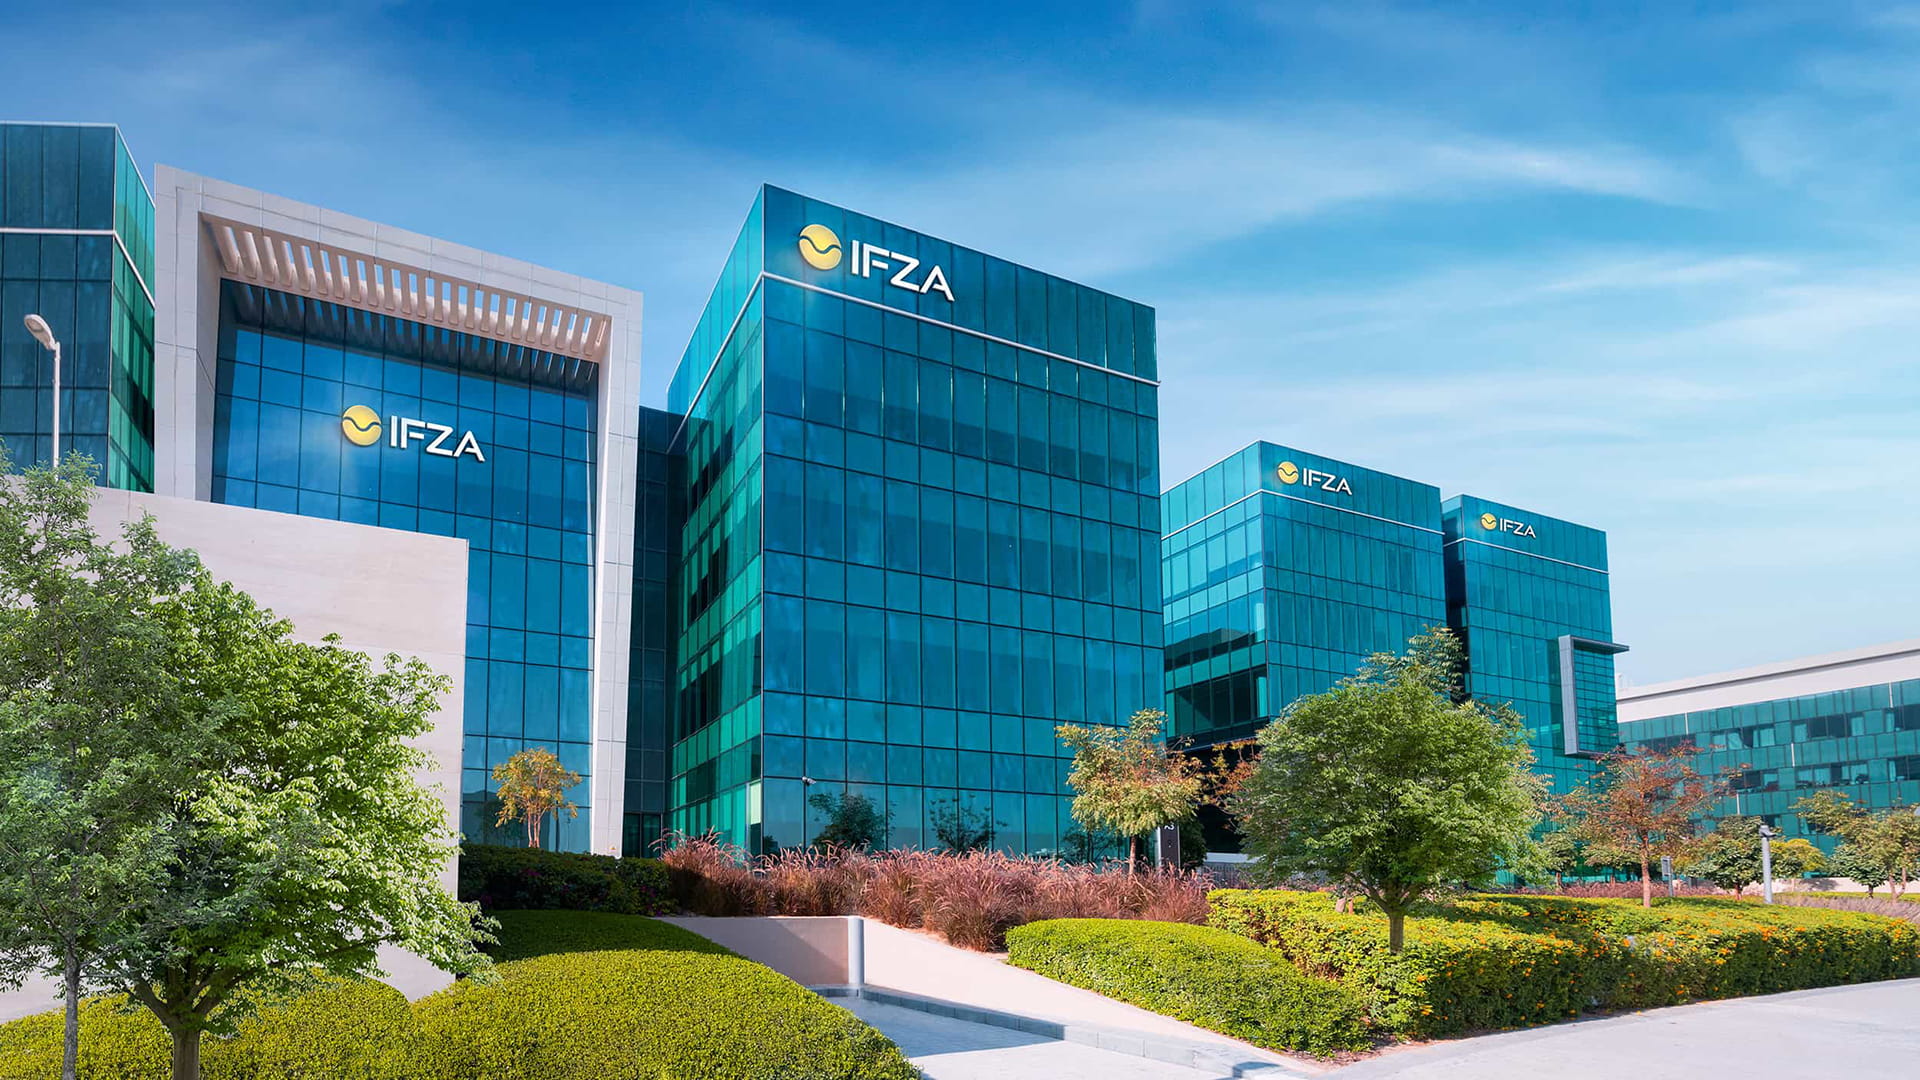 Take your business to greater heights with IFZA